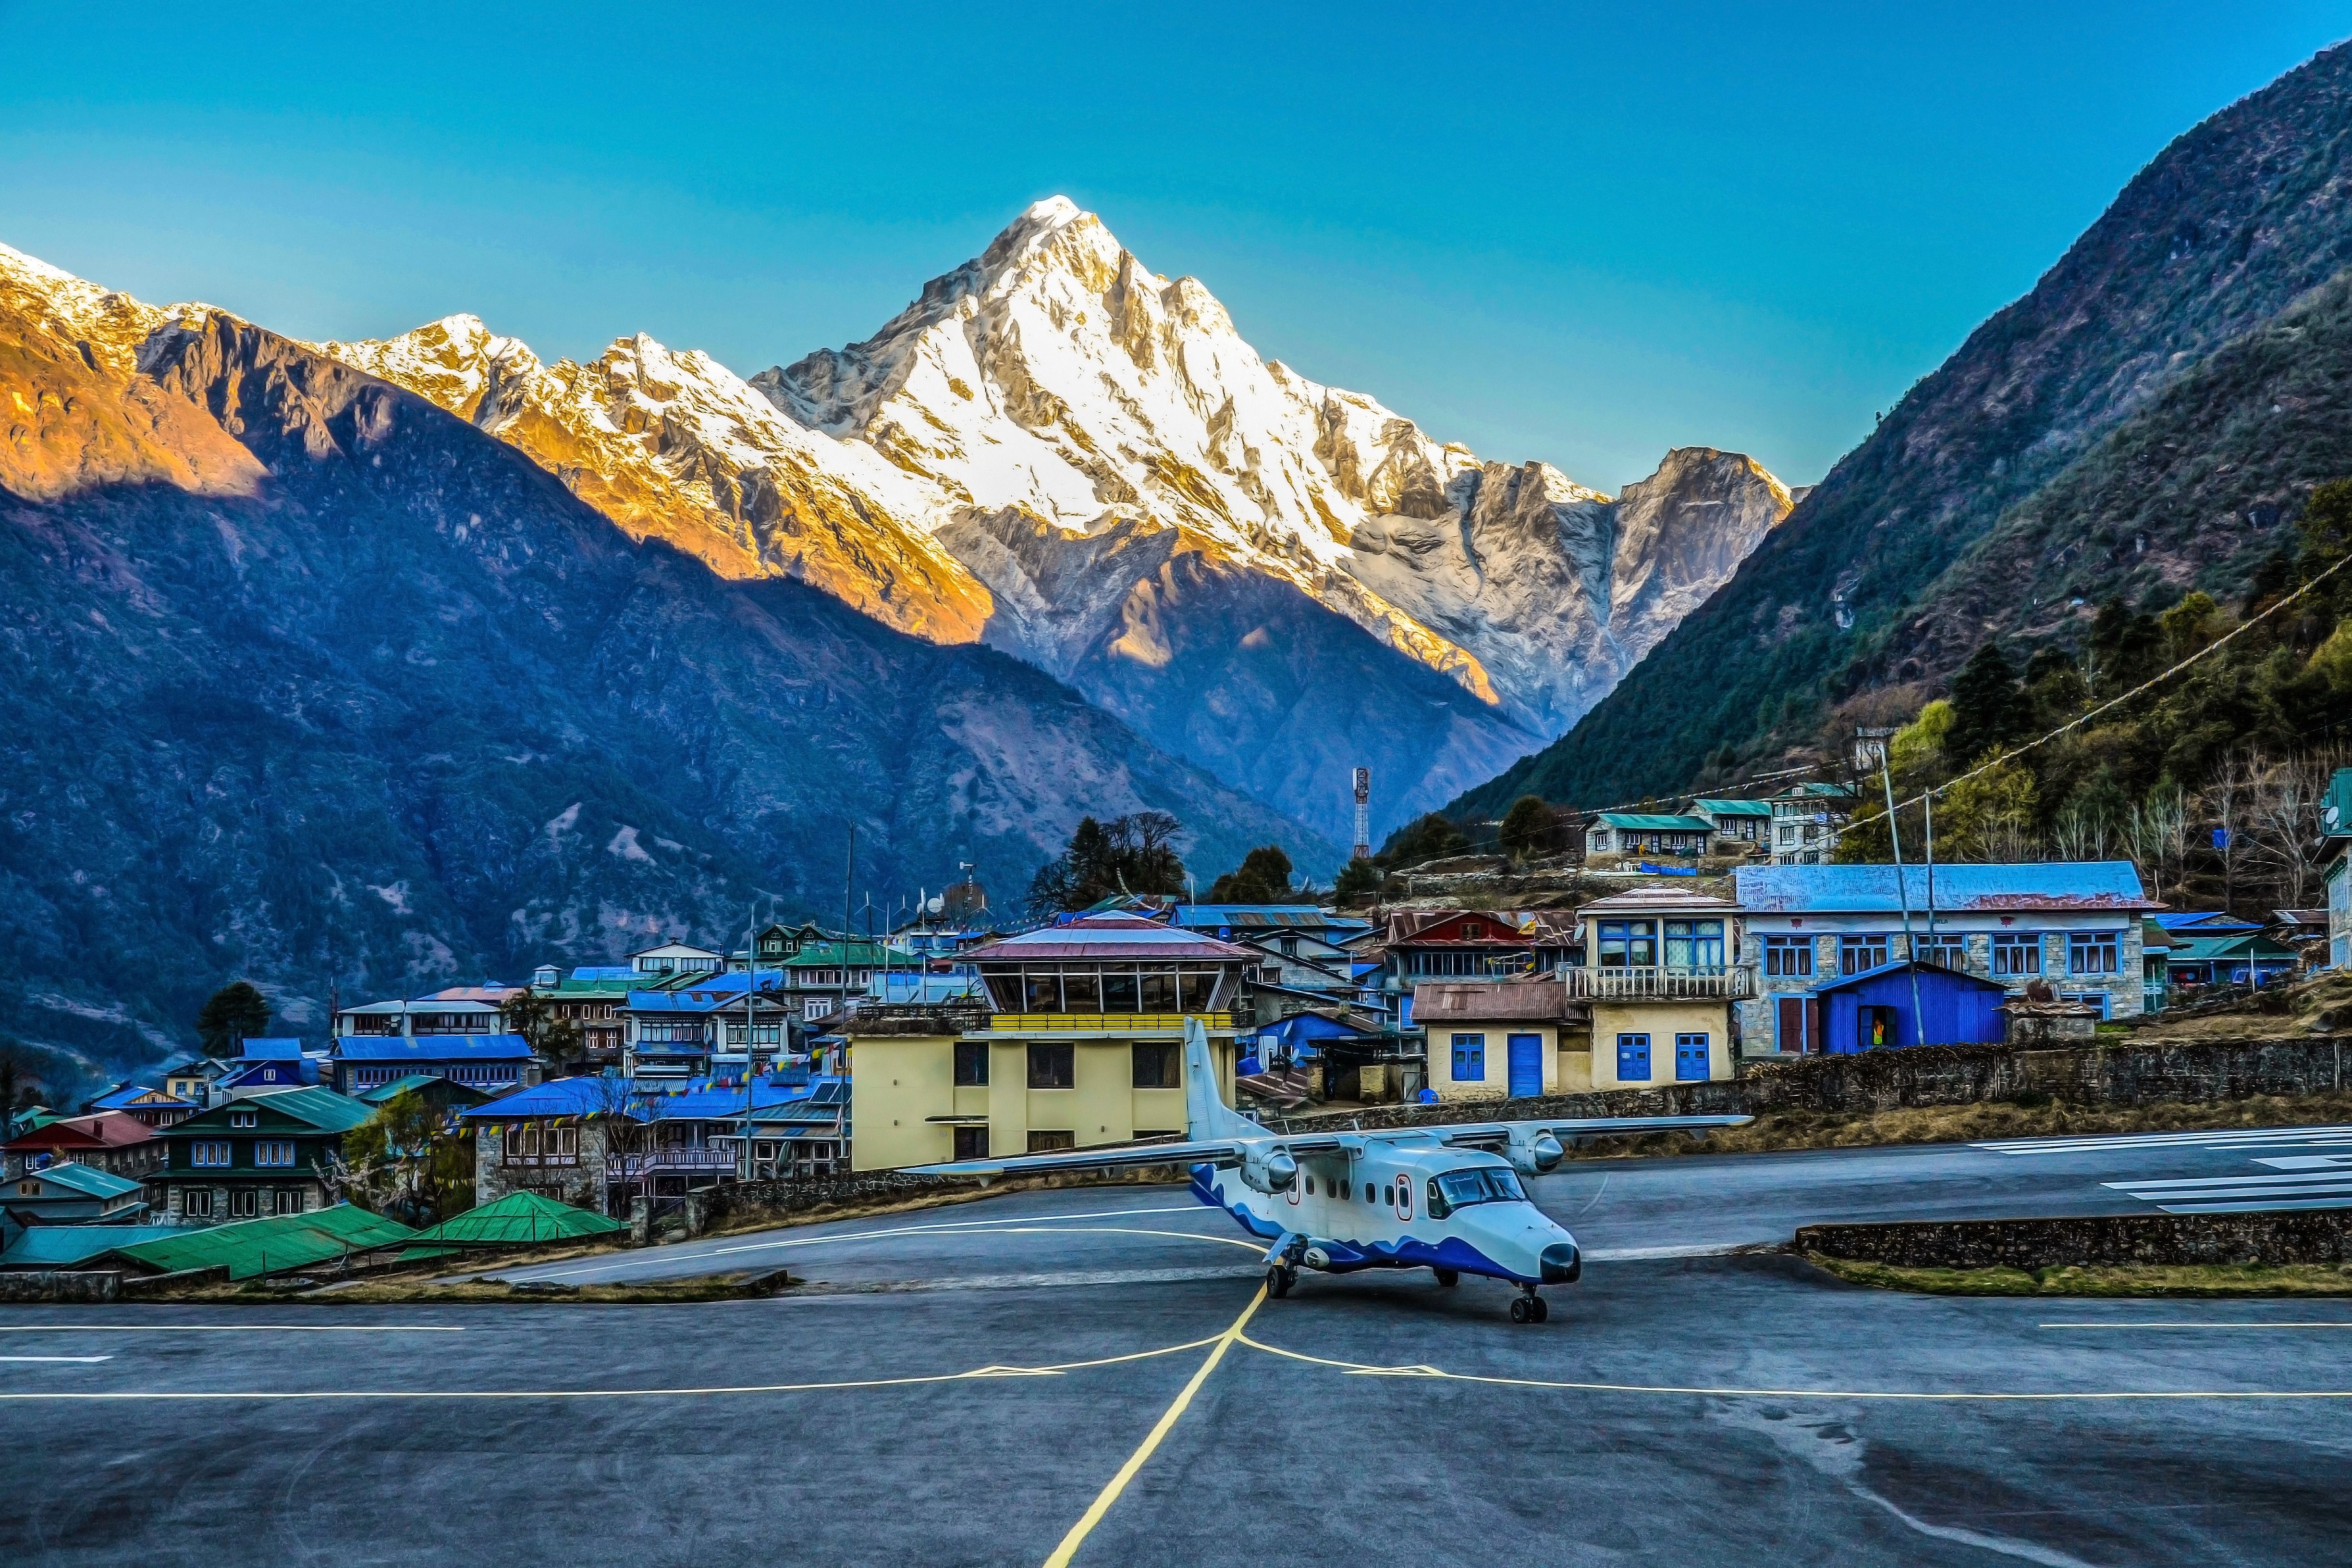 An aircraft on the apron at Lukla airport with a town and mountains in the background.